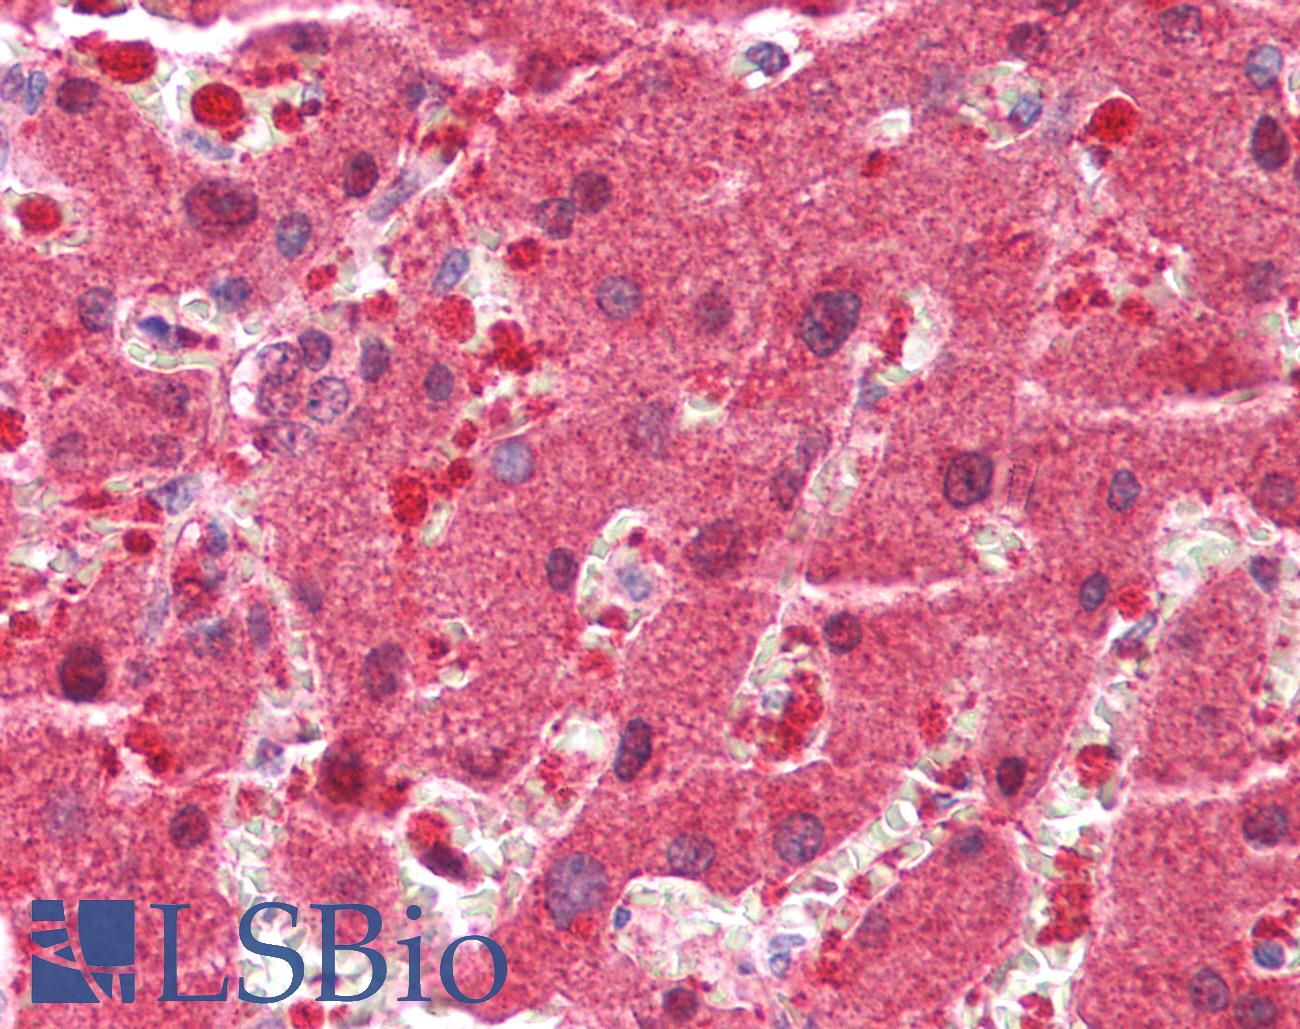 GAMT Antibody - Human Liver: Formalin-Fixed, Paraffin-Embedded (FFPE)